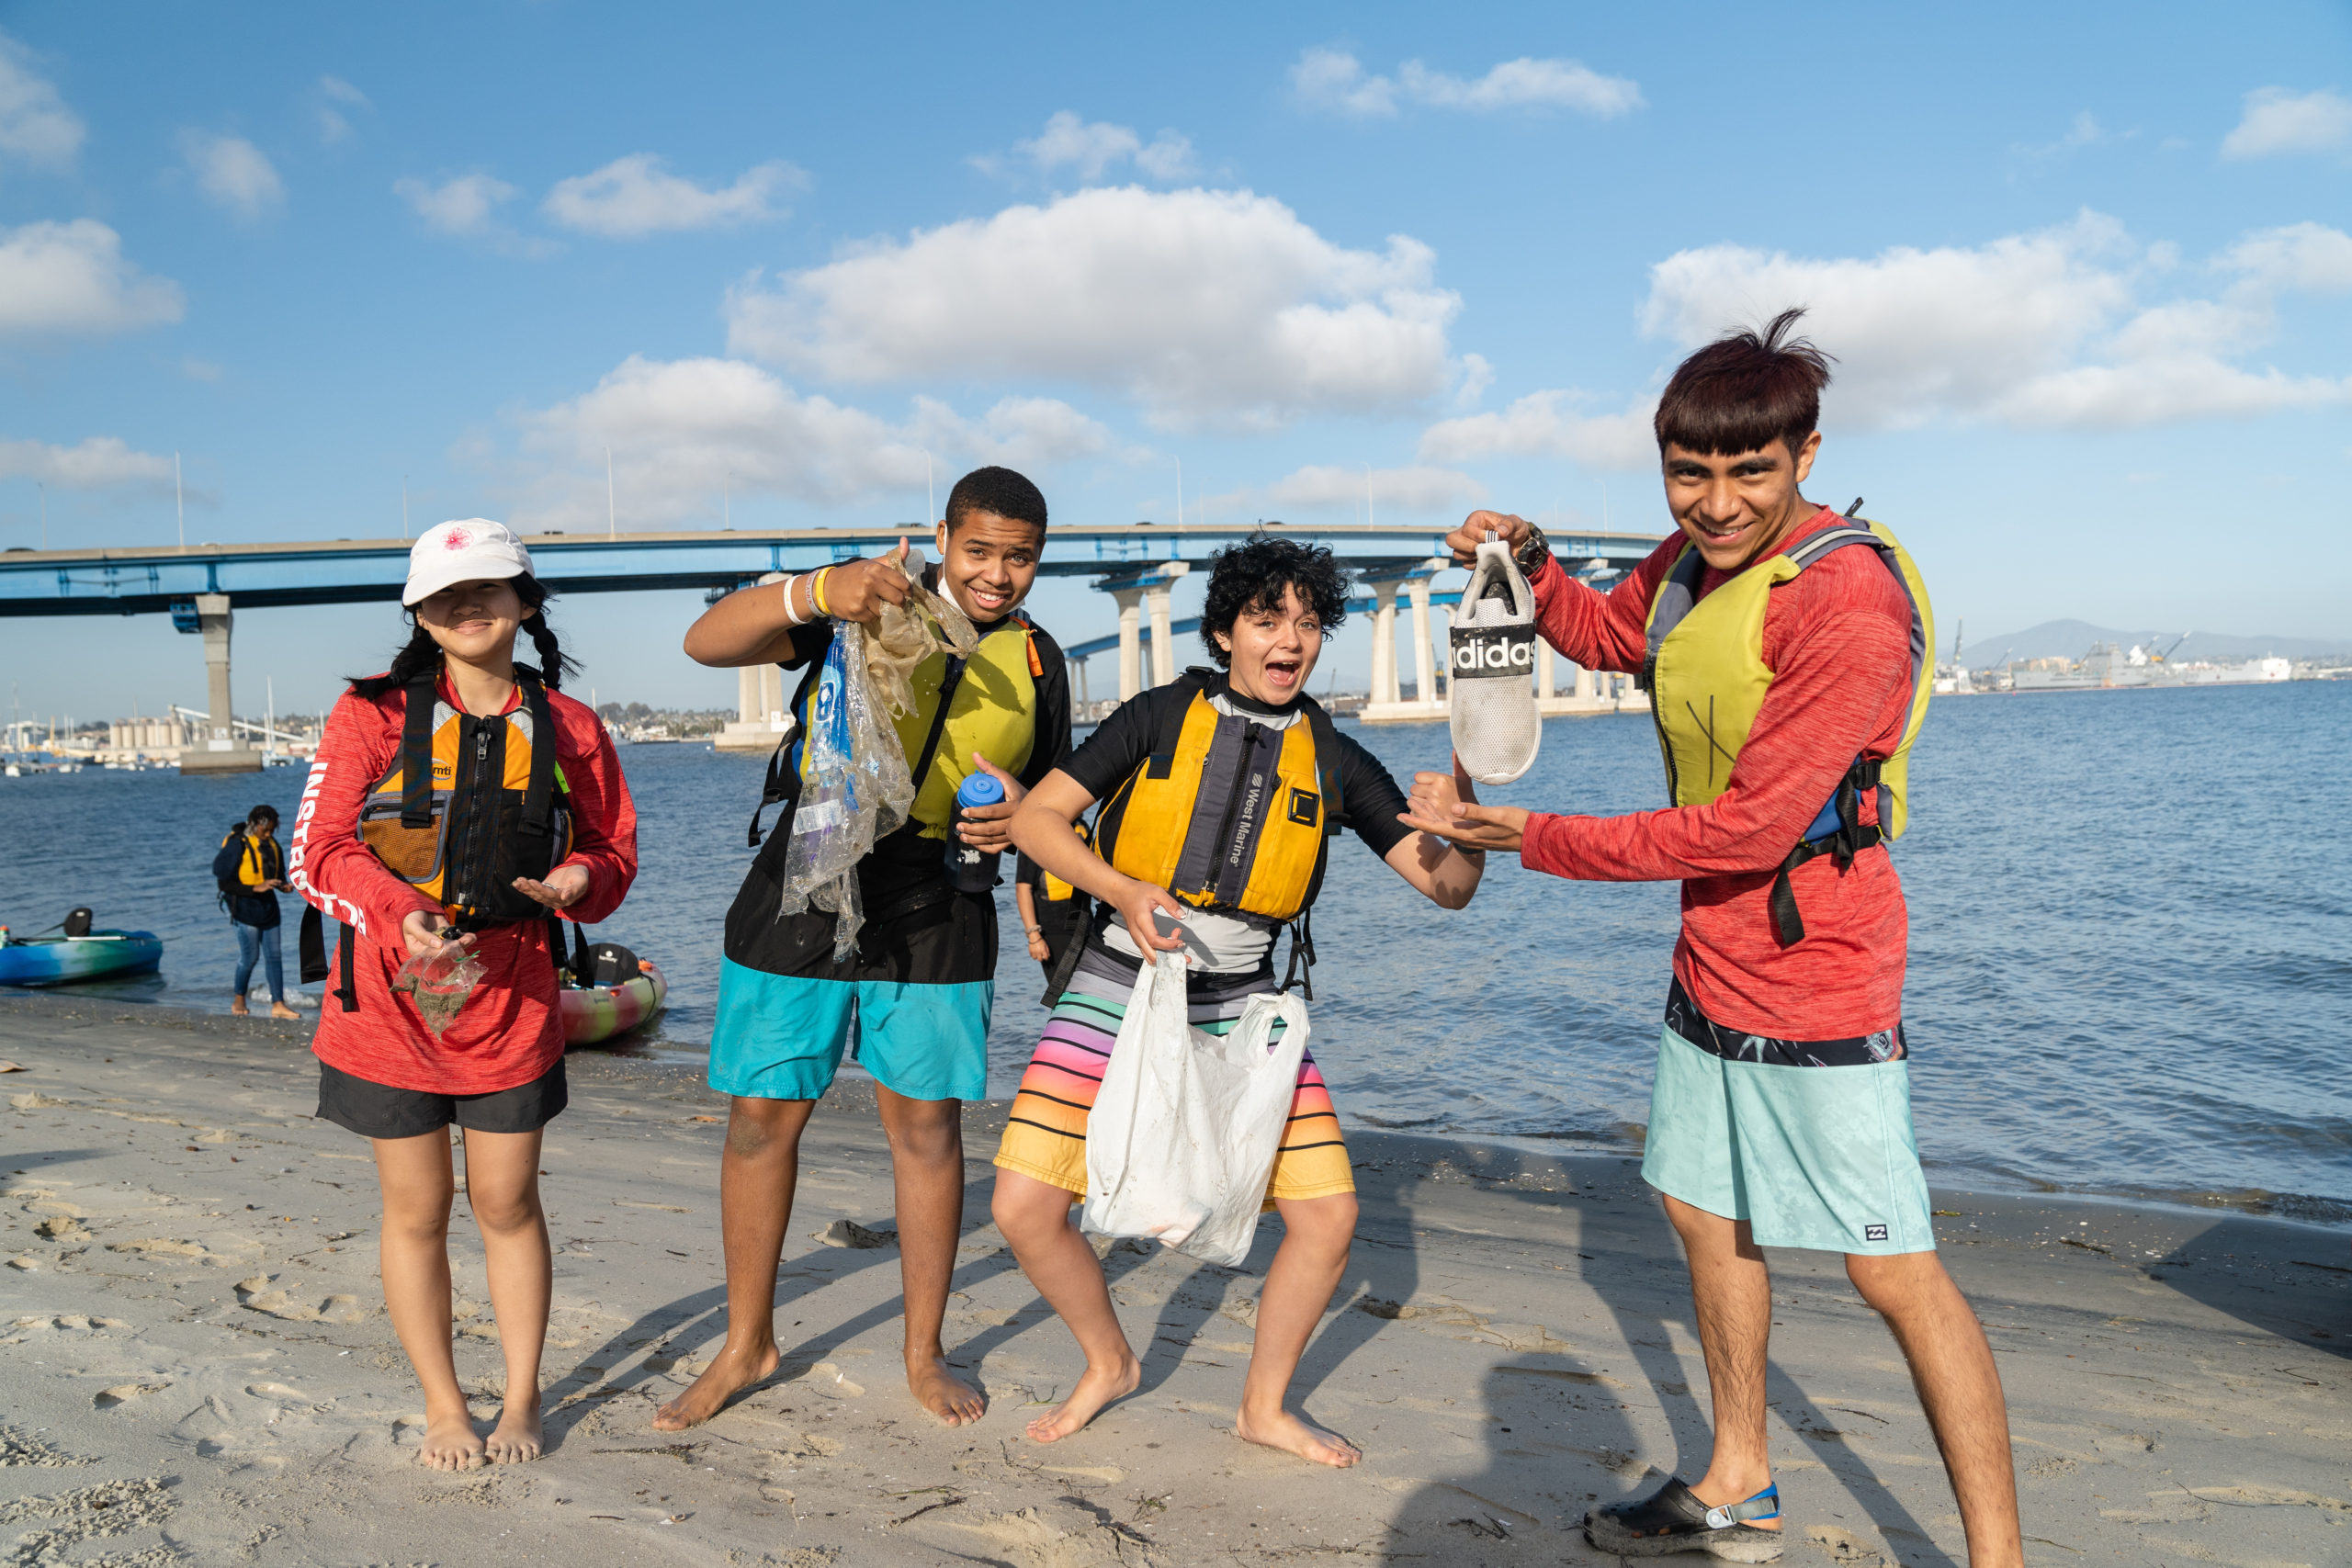 Four Outdoor Outreach youth participants posing on the beach of Tidelands Park and holding up a shoe while smiling.